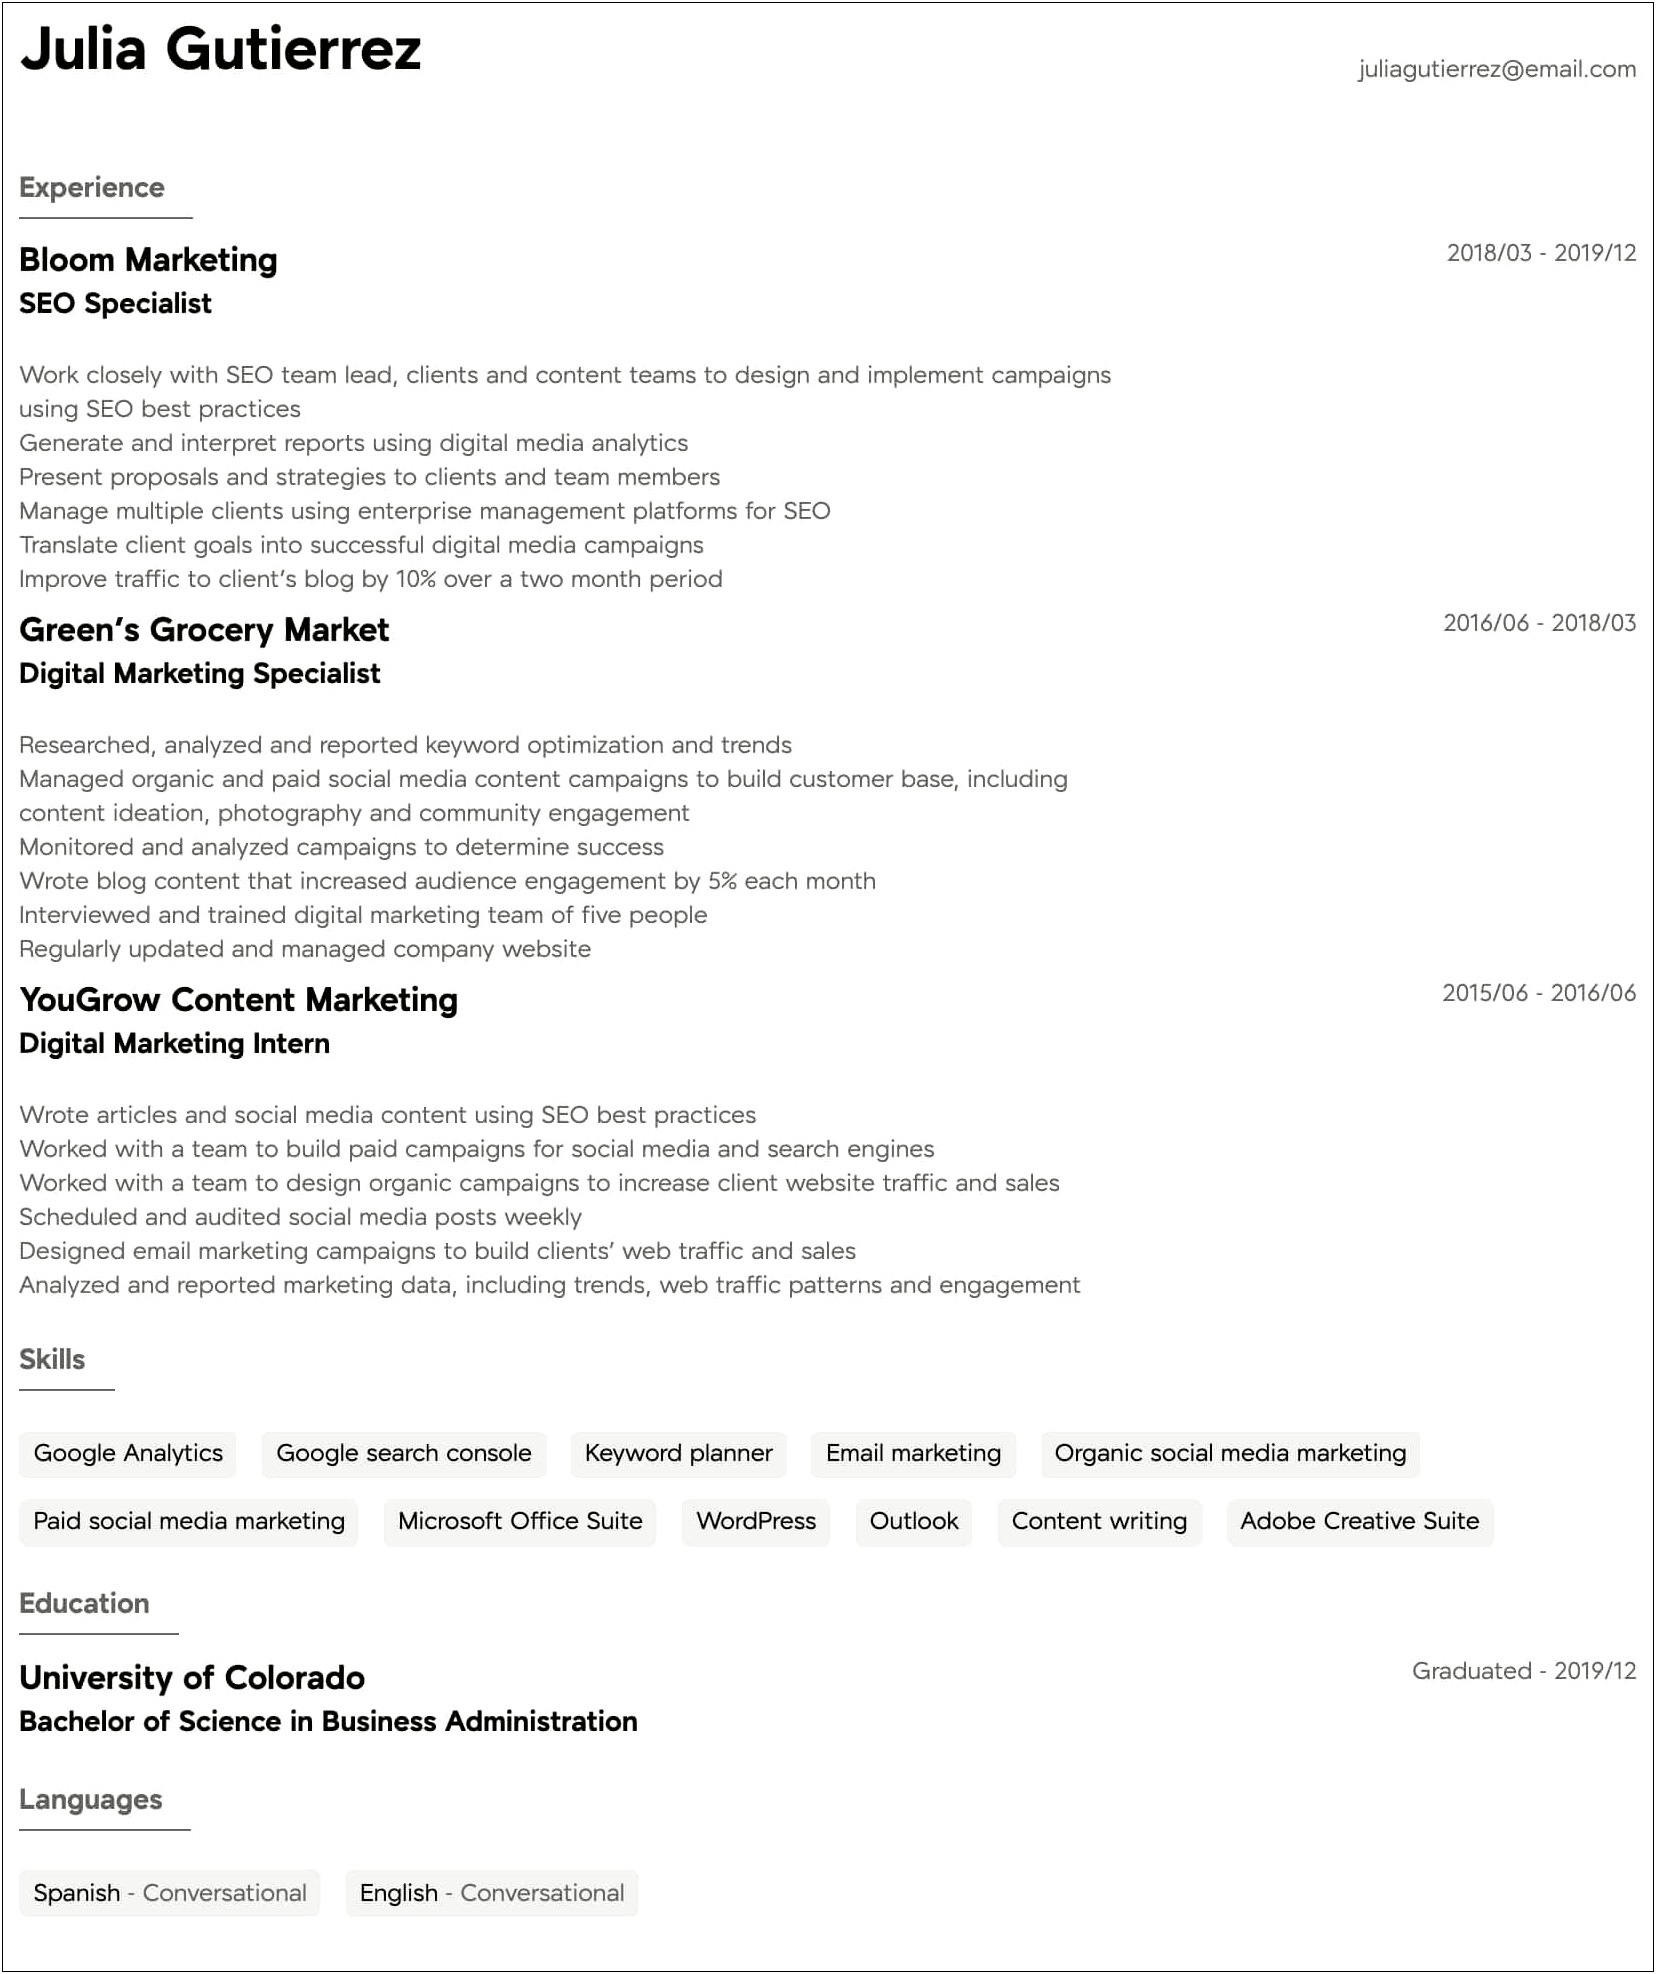 Examples Of A Creative Resume For Marketing